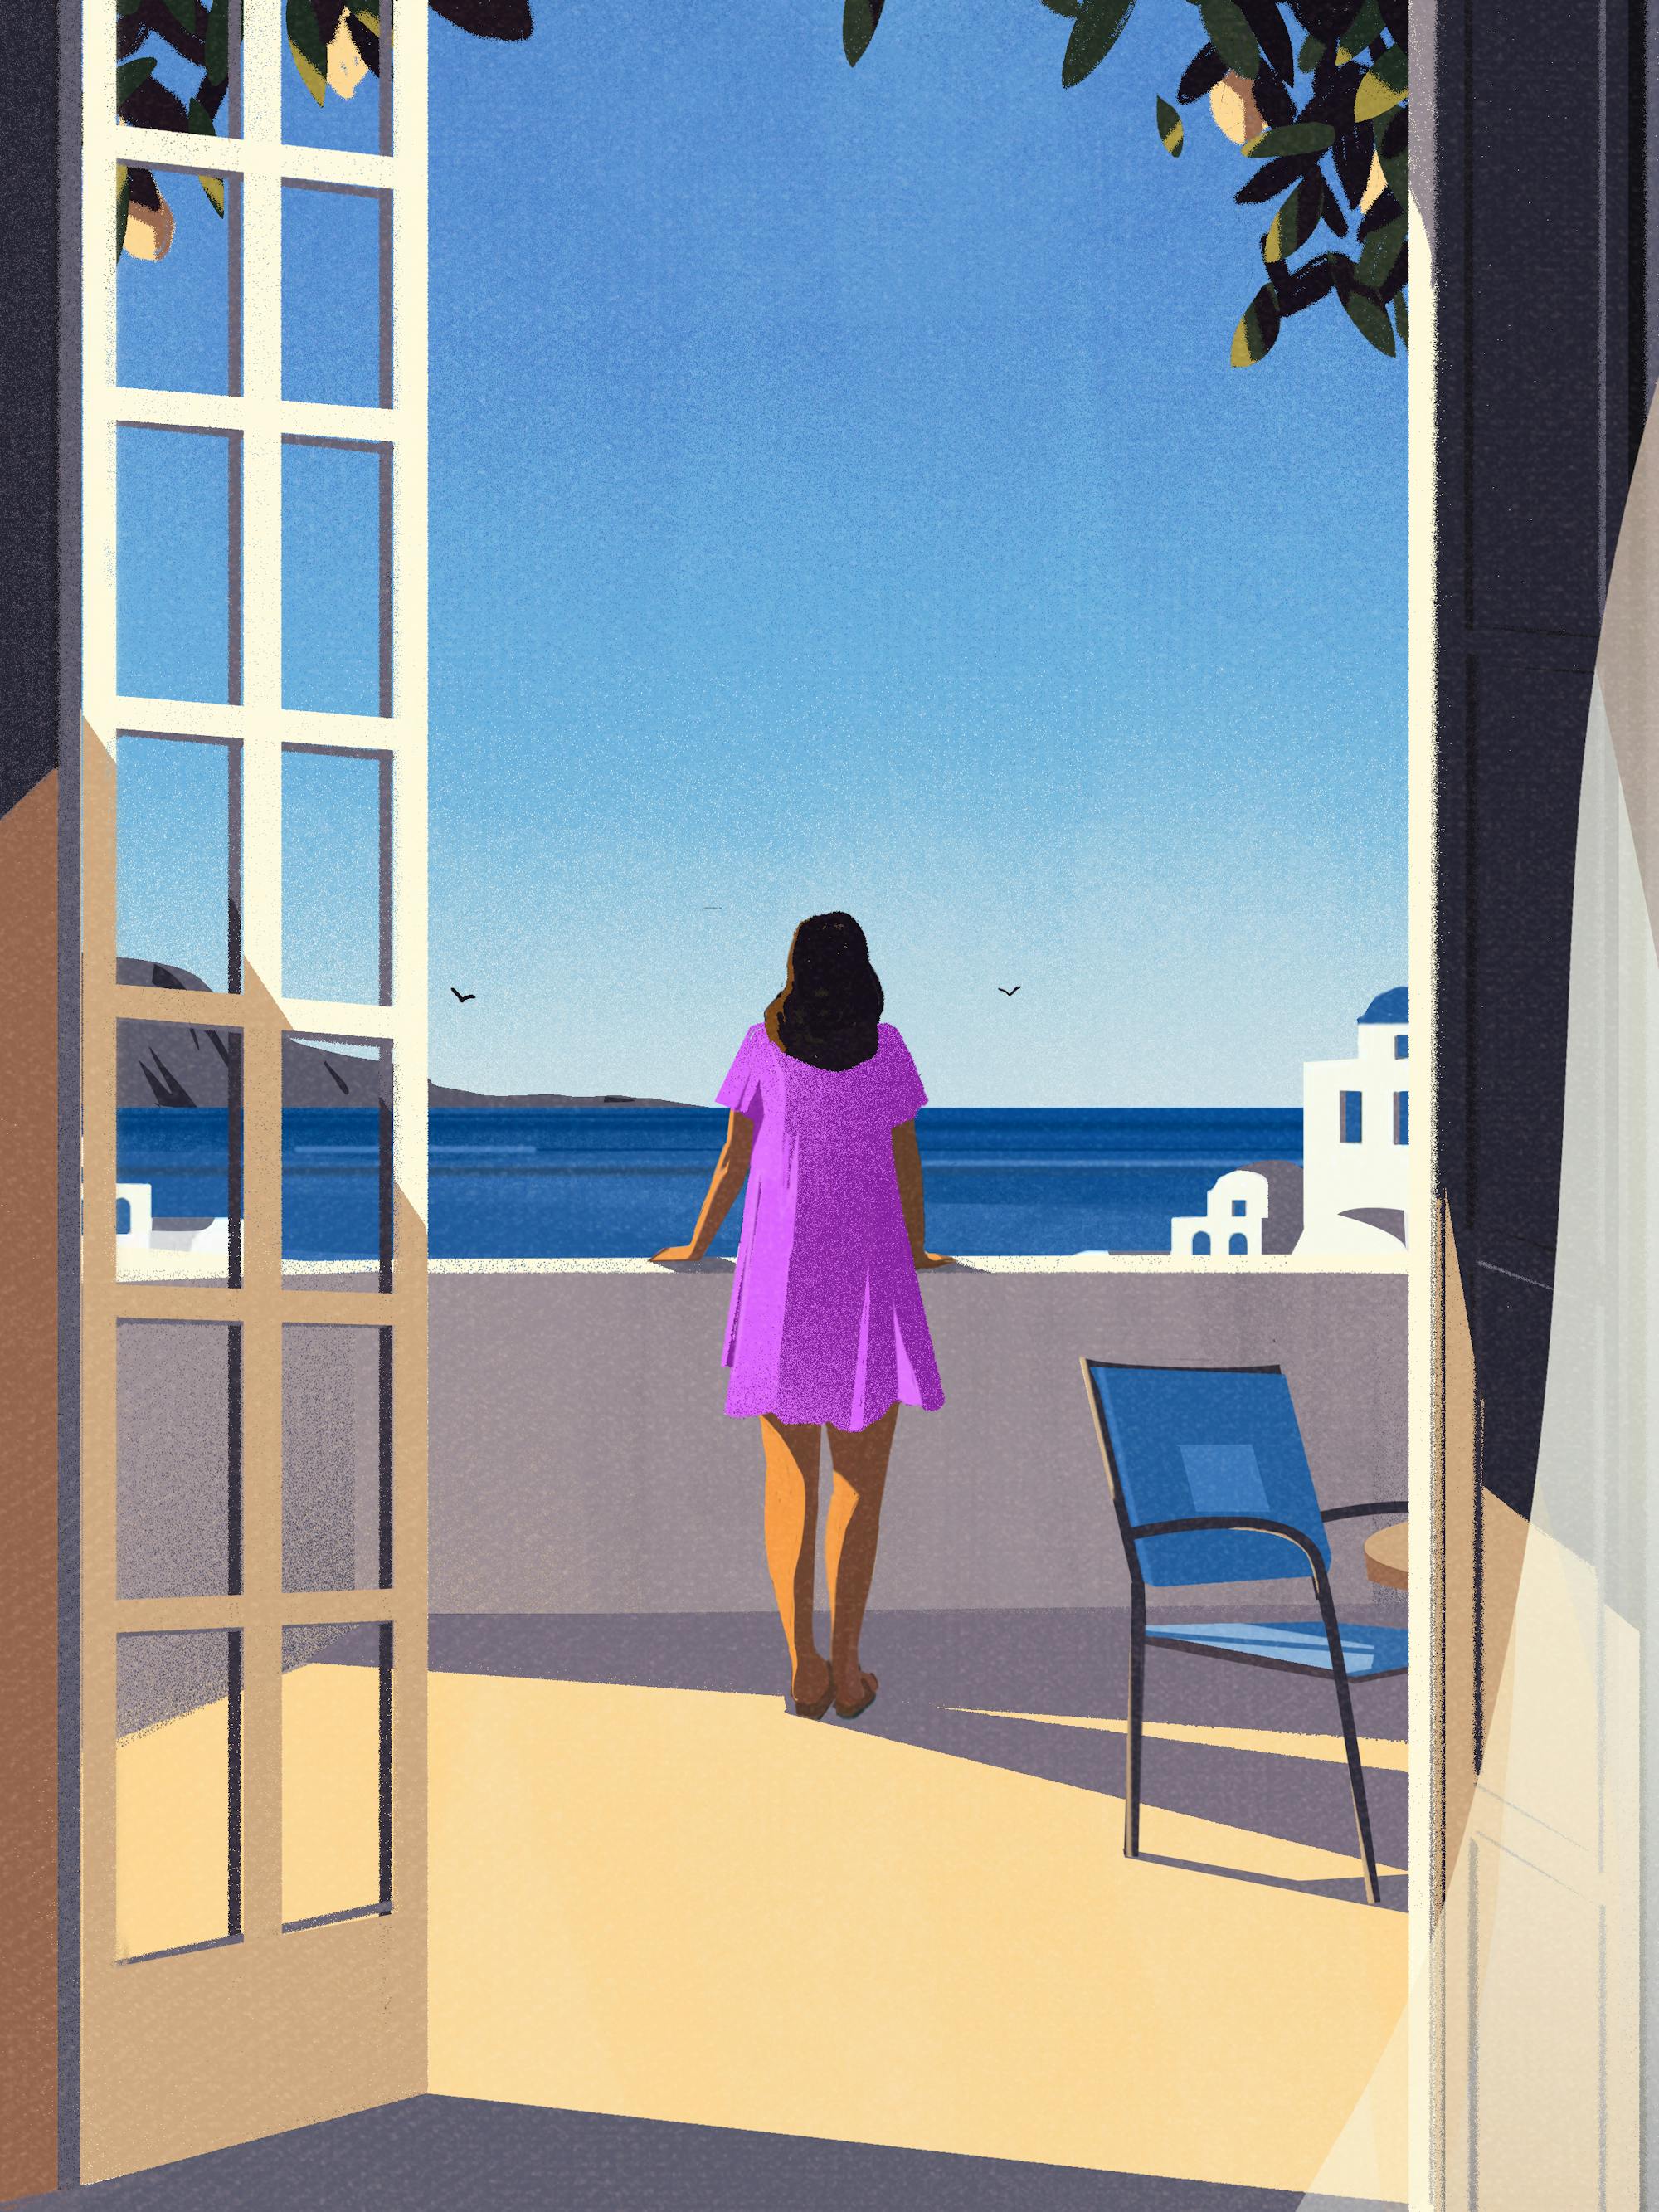 An illustration of Emma Morley wearing a purple dress and leaning over a porch railing.